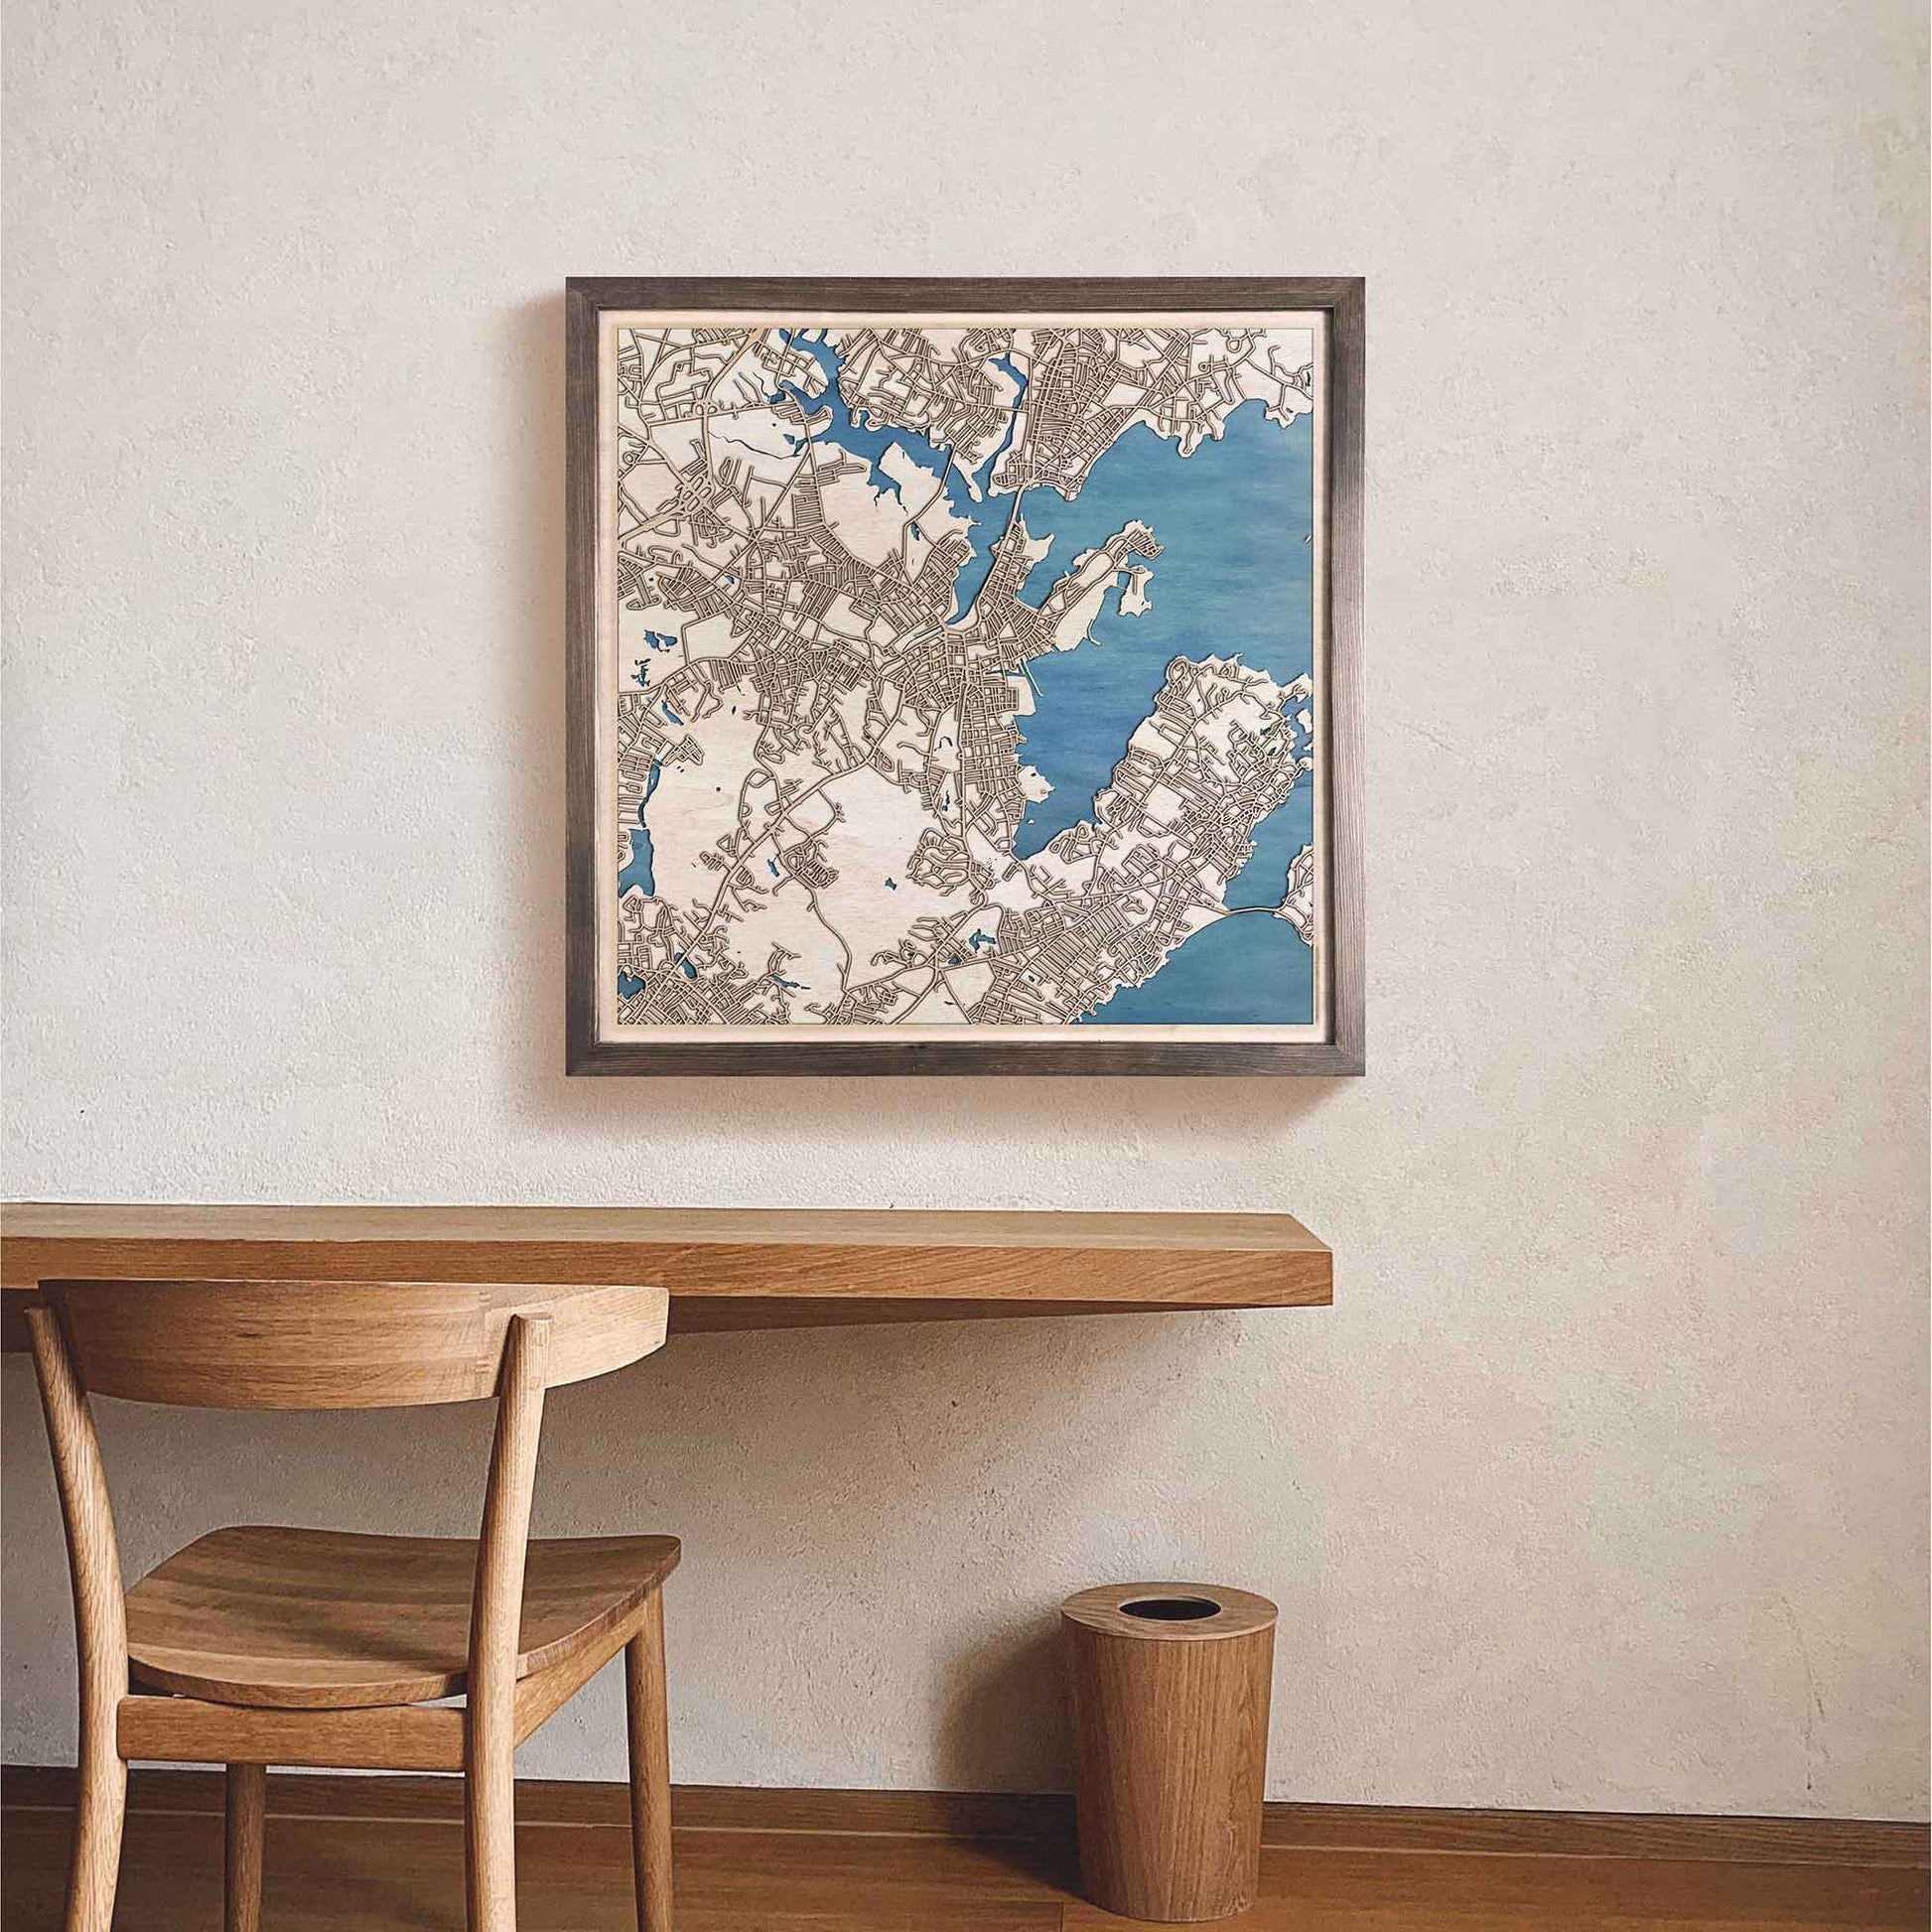 Salem Wooden Map by CityWood - Custom Wood Map Art - Unique Laser Cut Engraved - Anniversary Gift